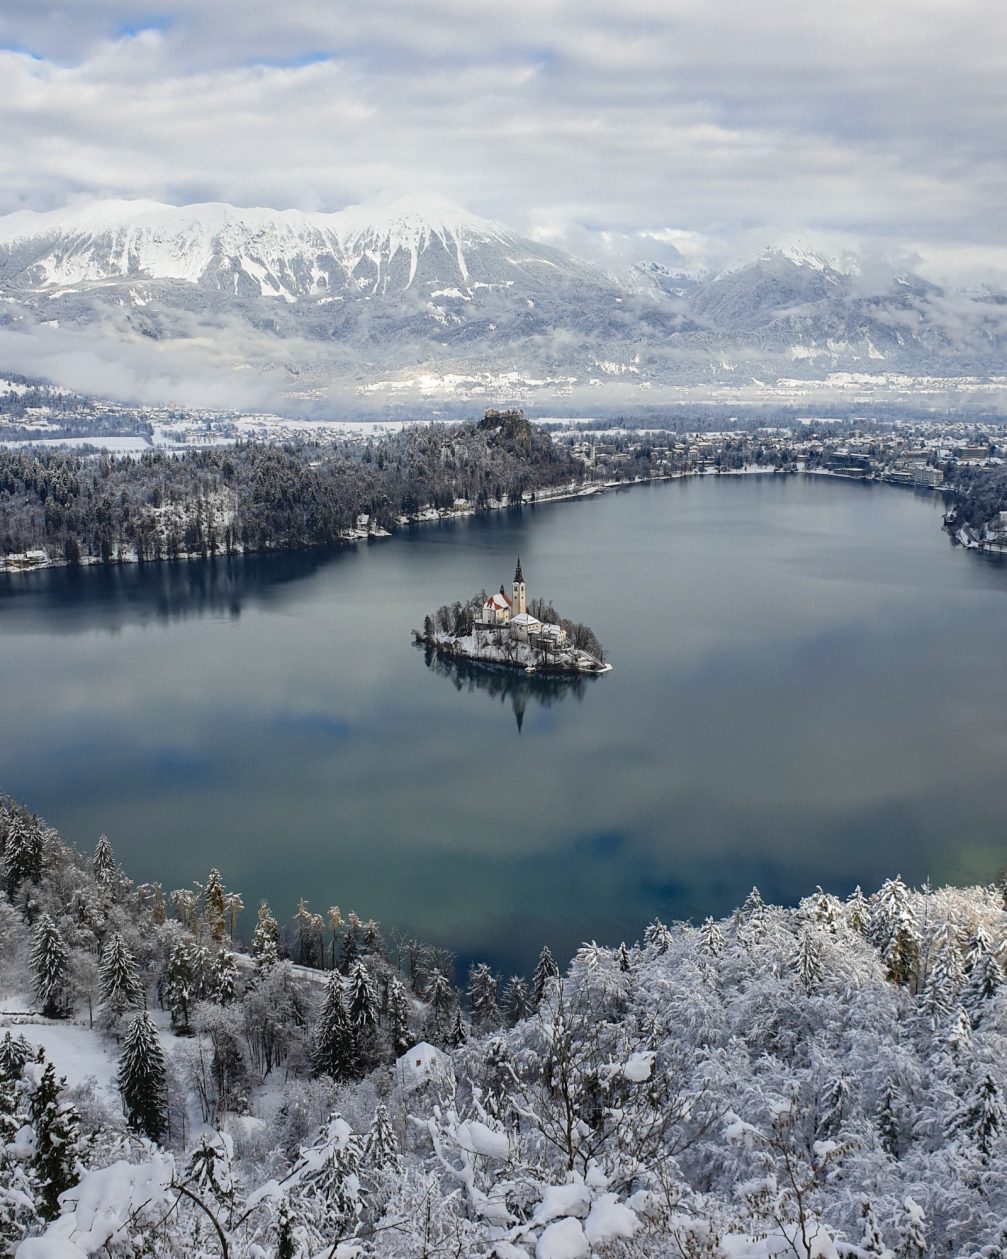 Lake Bled with its island in winter from Mala Osojnica